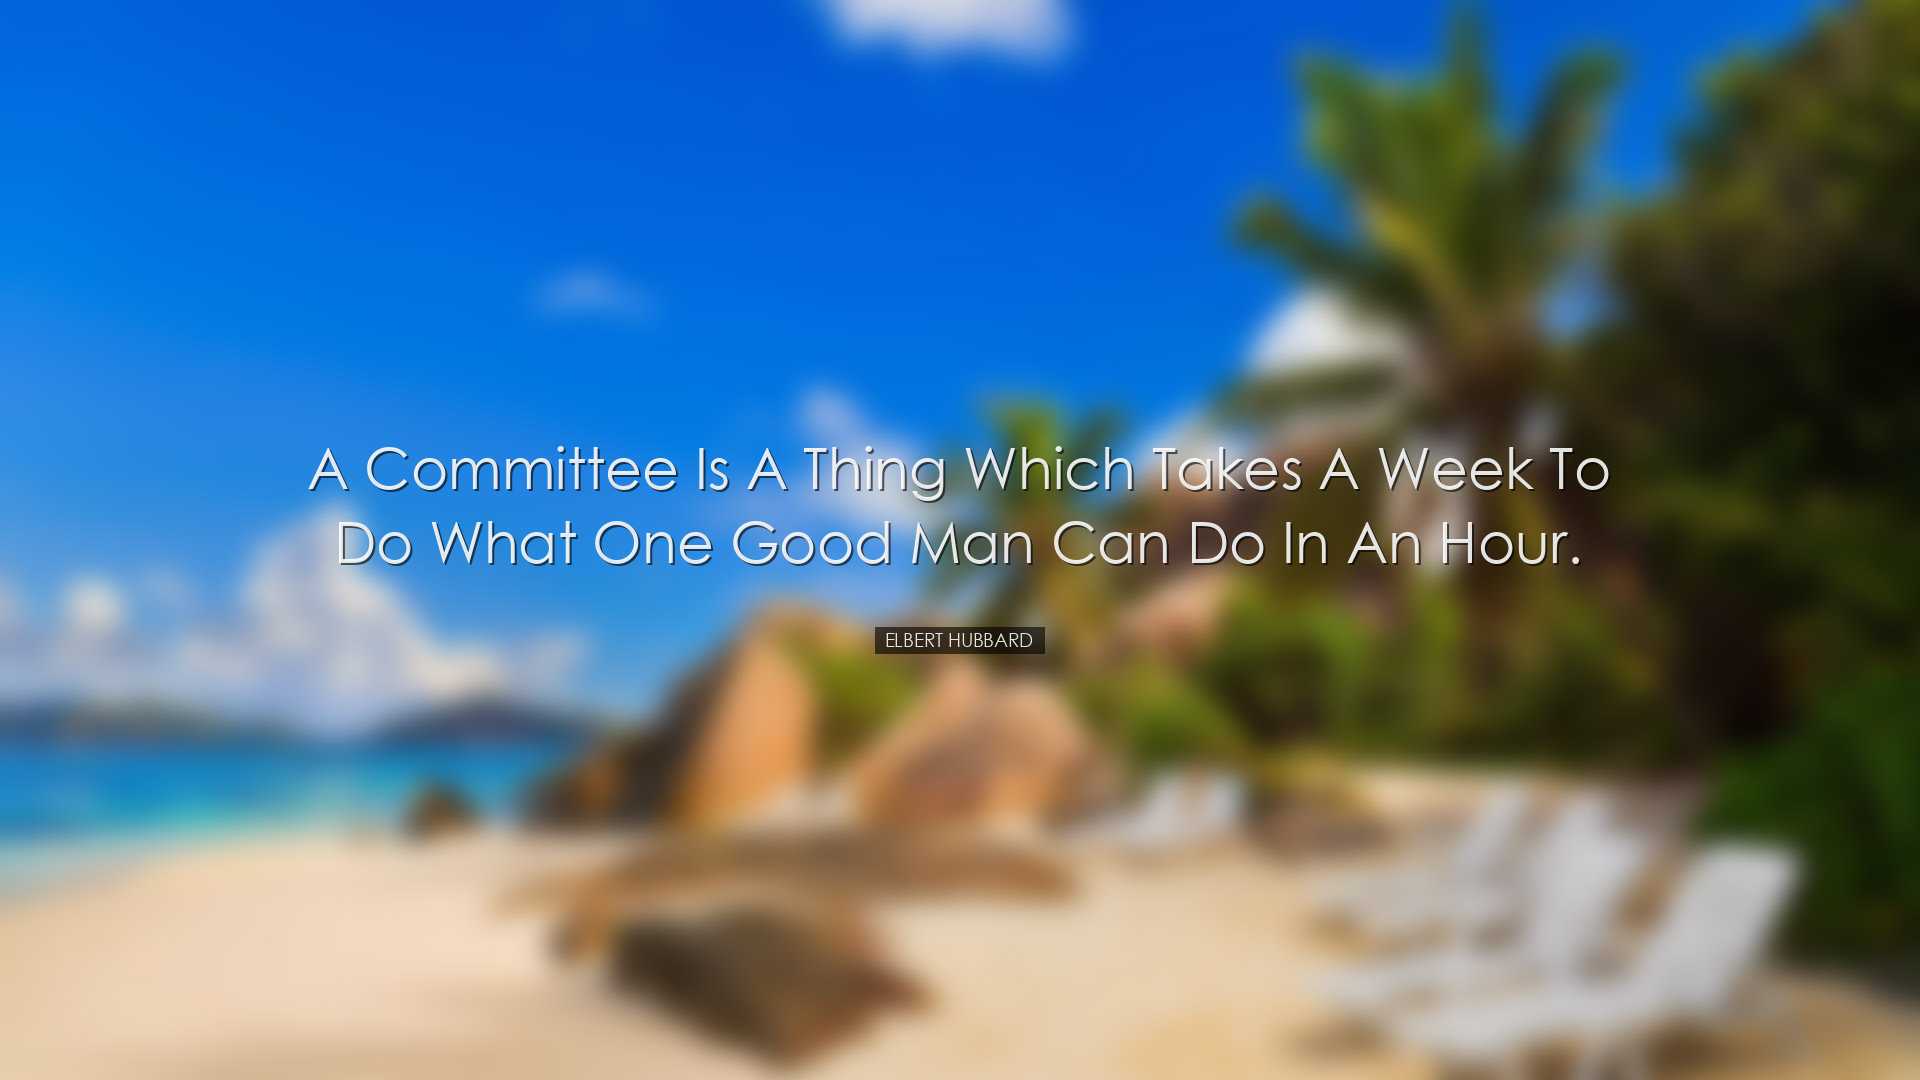 A committee is a thing which takes a week to do what one good man